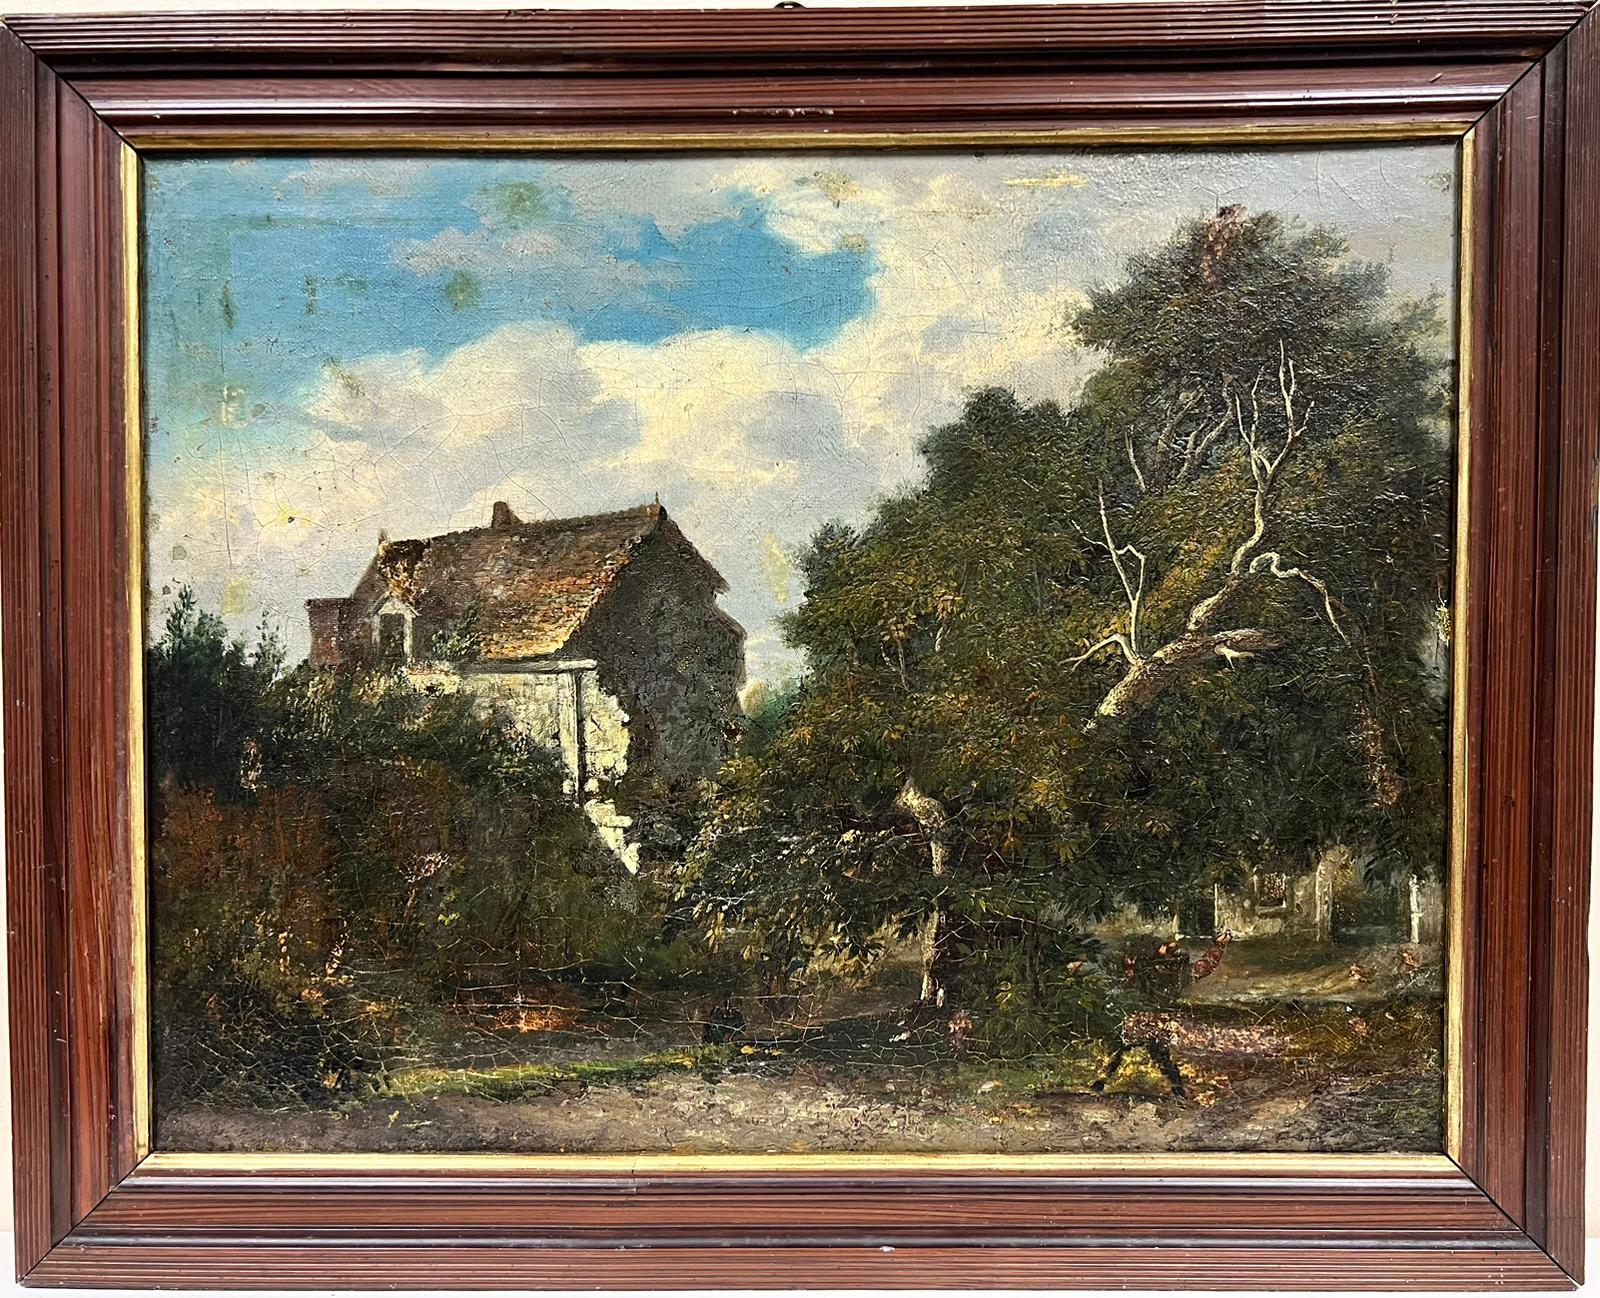 Artist/ School: French School, 19th century, inscribed verso

Title: The Woodland Cottage

Medium: oil on canvas laid over board, framed

Framed: 19 x 24 inches
Painting: 16 x 20.5 inches

Provenance: private collection, France

Condition: The